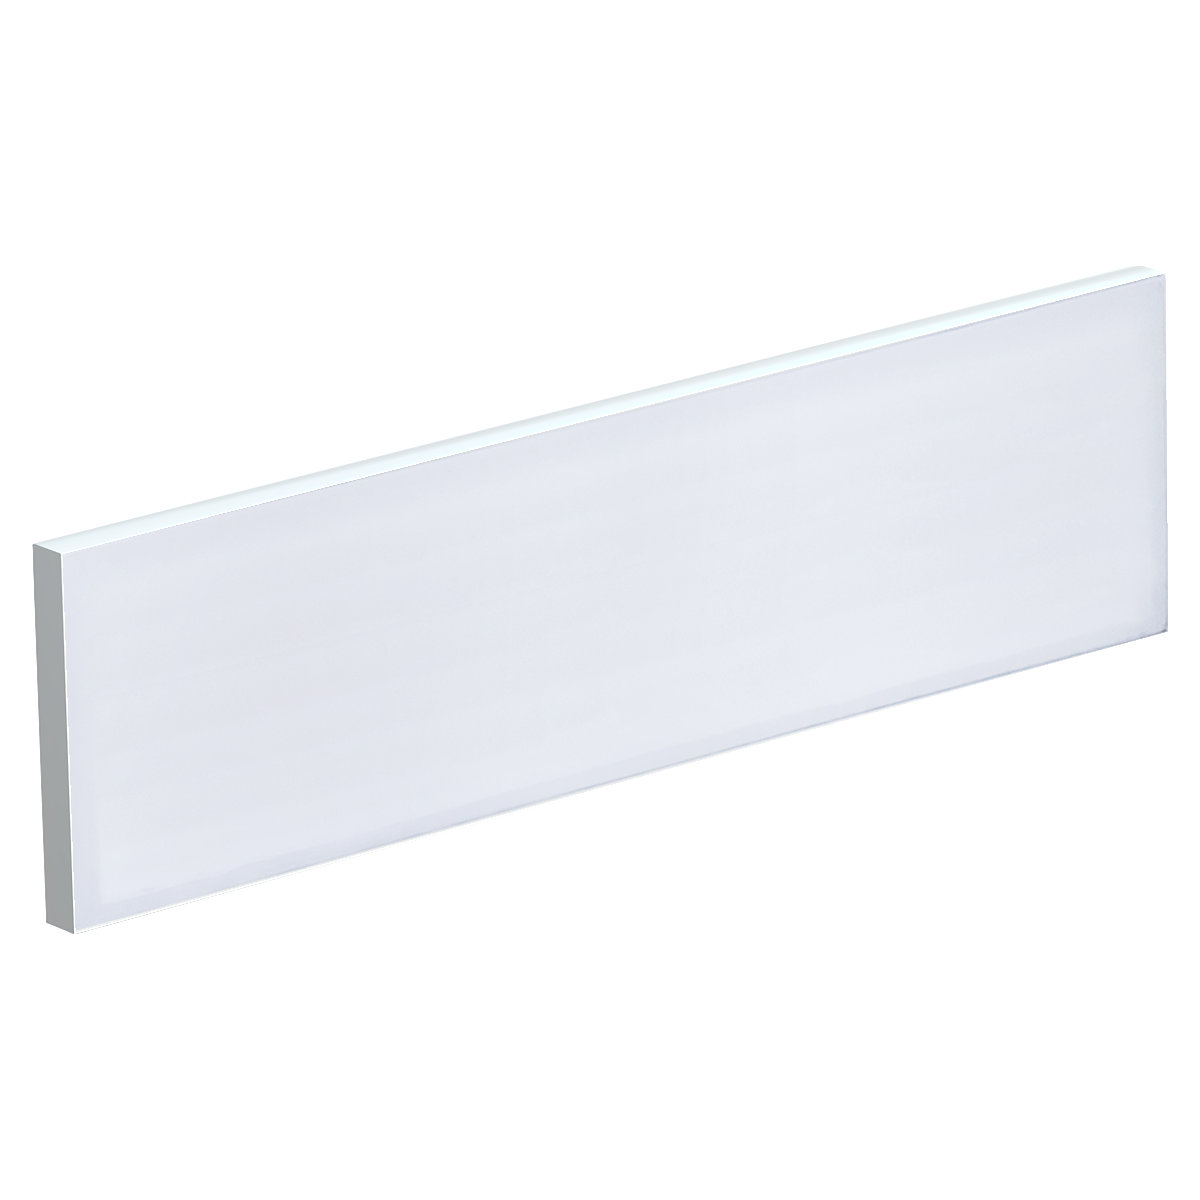 Table partition for team desks, width 1400 mm, white cover-8